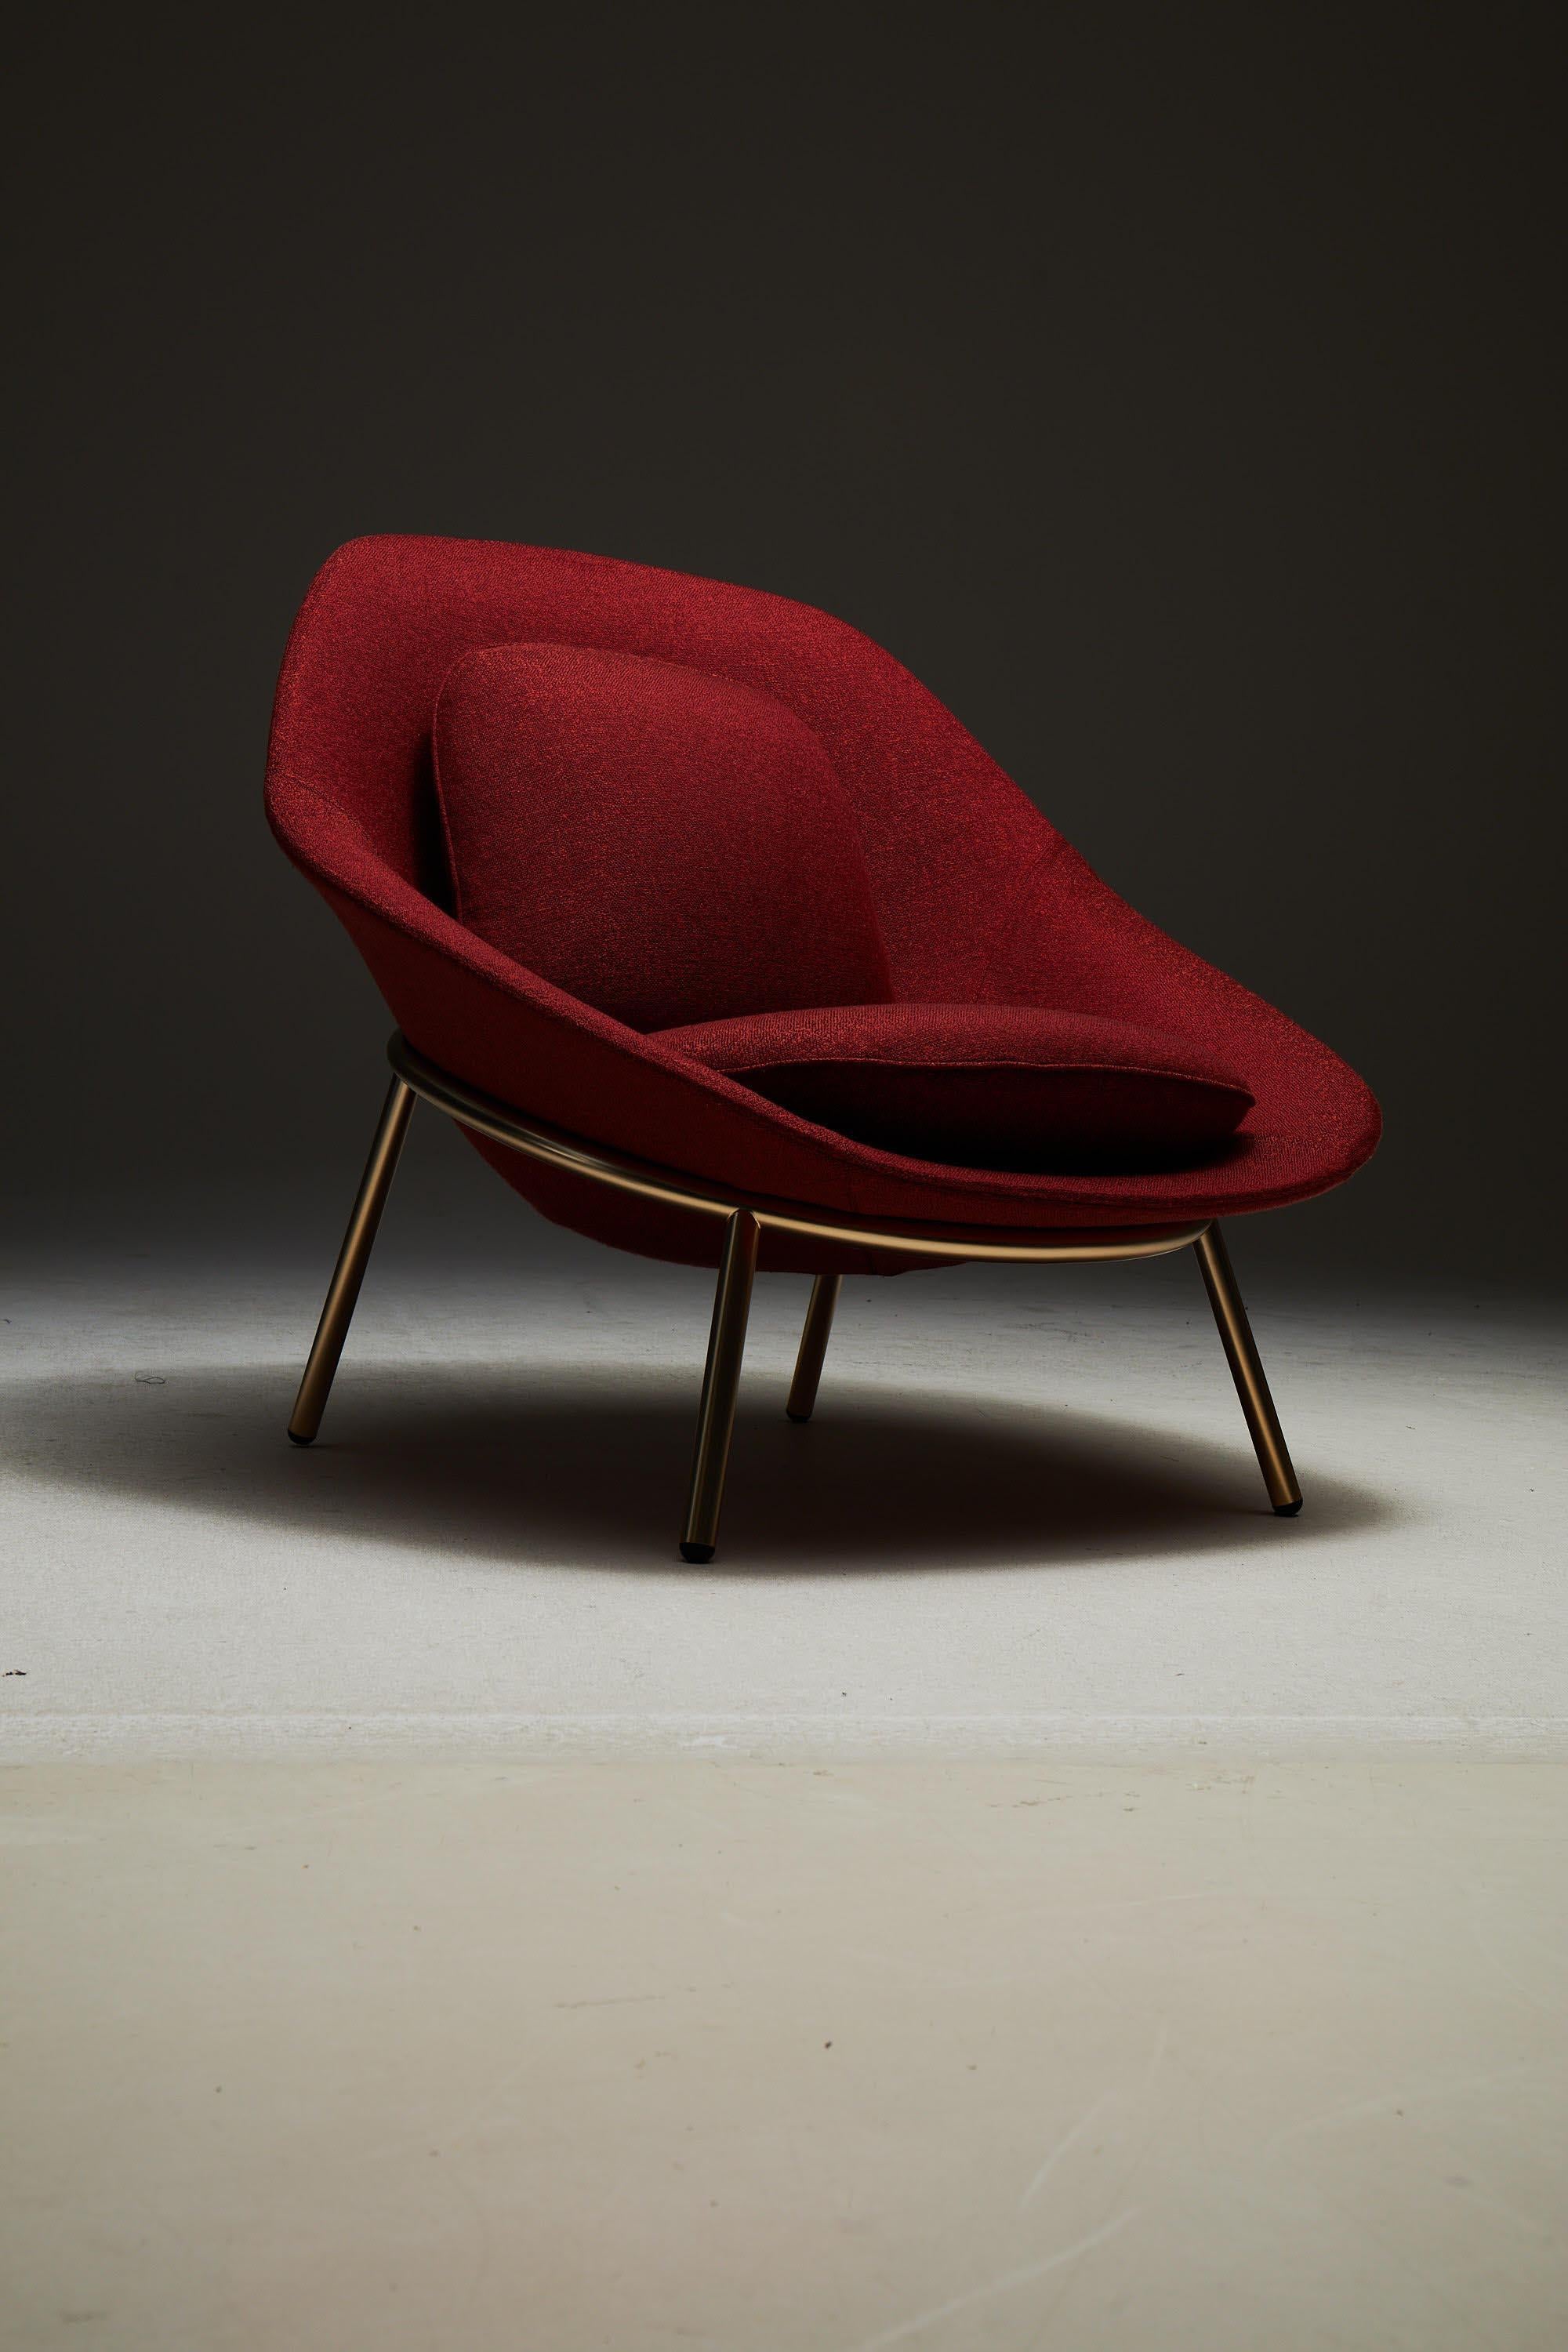 Amphora lounge chair by Noé Duchaufour Lawrance
Dimensions: W97x D 89 x H 90 cm
Materials: Champagne structure, Fabric, Leather
Also available in other materials.


Biography:
Not wishing to simply produce or be rational about a product, Noé